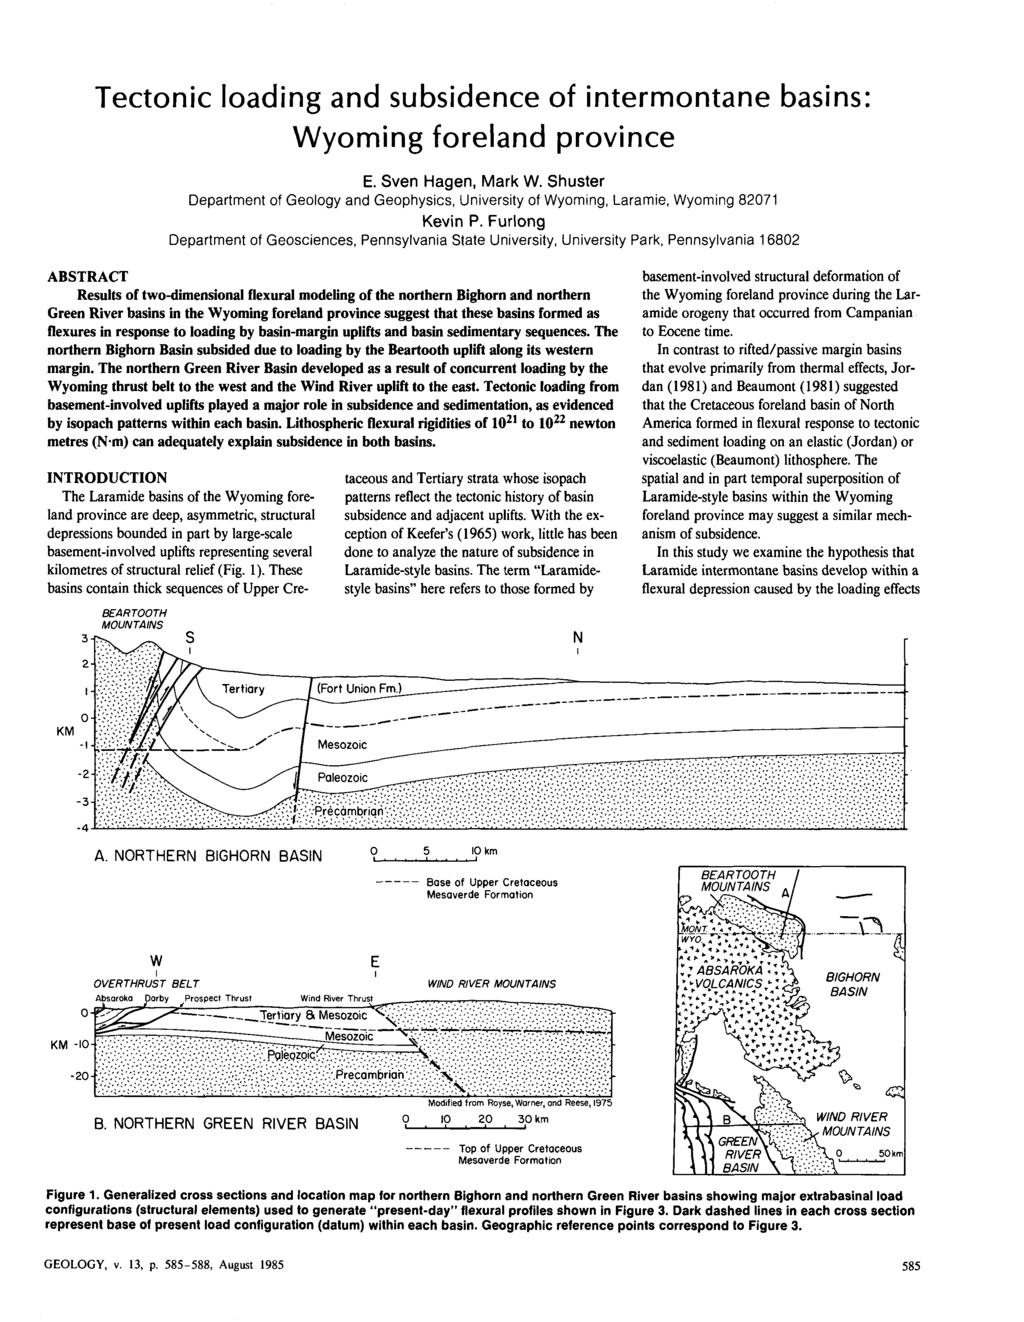 Flexure of the lithosphere in foreland basins BEARTOOTH MOUNTAINS 3- S N 2- I- M//\/ V ~* rtiary / (Fort Union FmJ 0- KM -I- Mesozoic -2- i l l